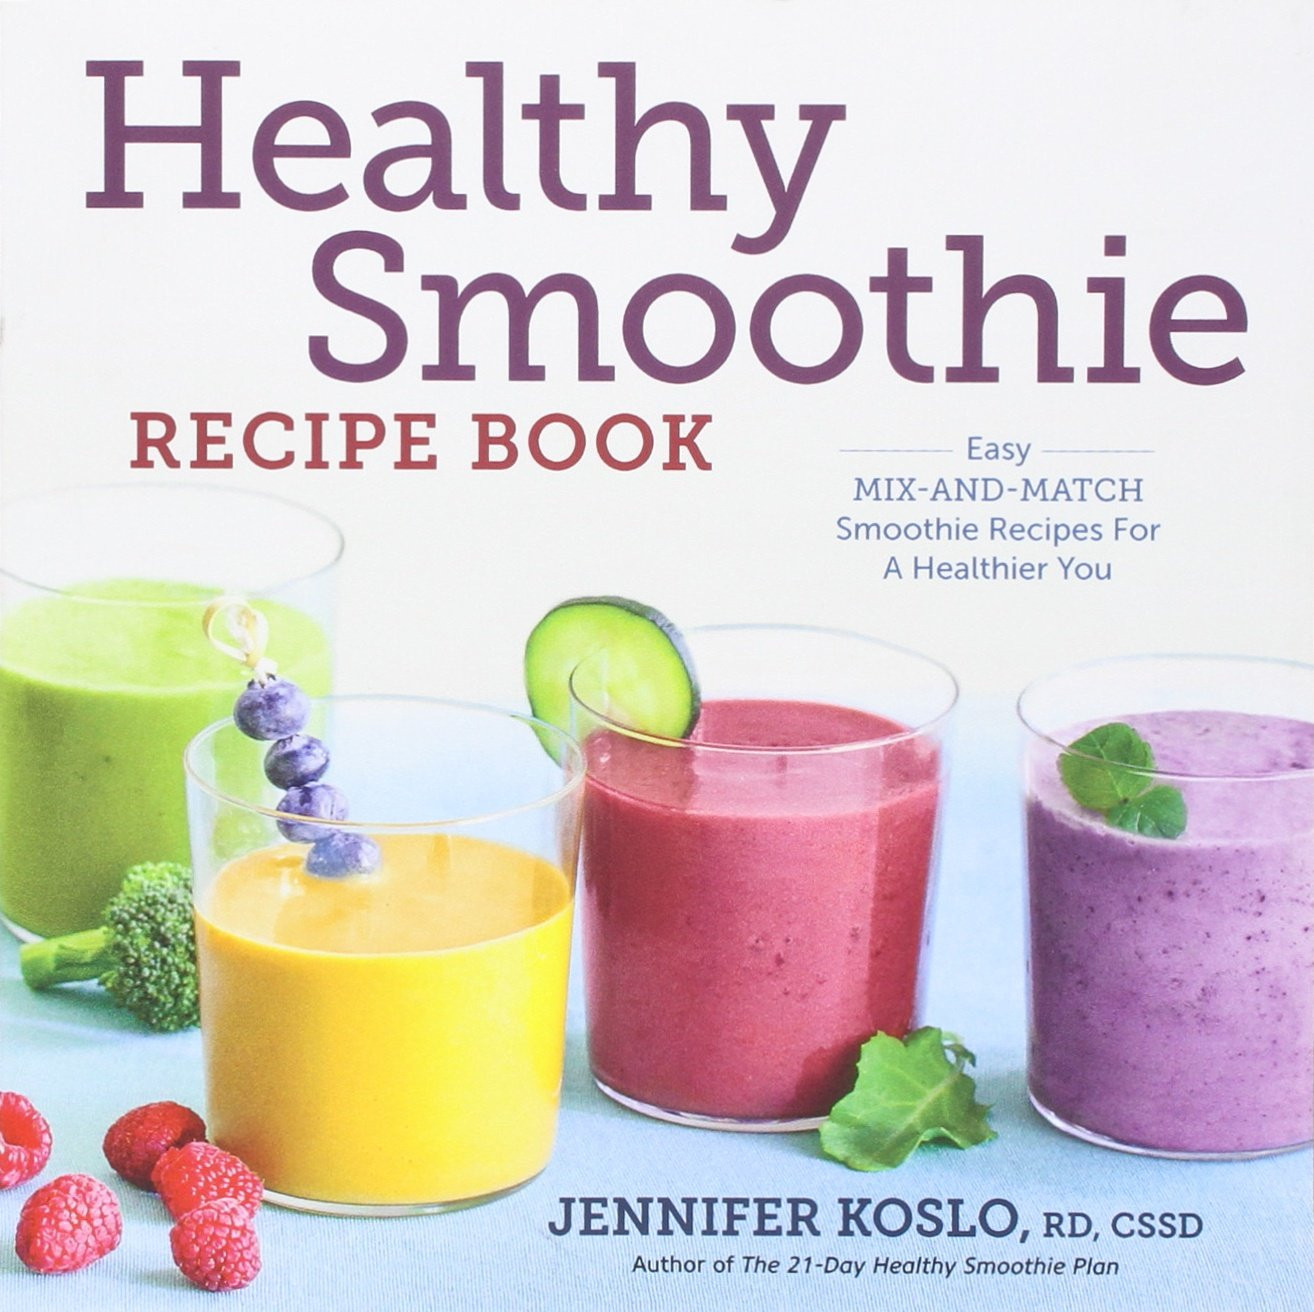 Easy Healthy Smoothie Recipes
 Cheapest copy of Healthy Smoothie Recipe Book Easy Mix